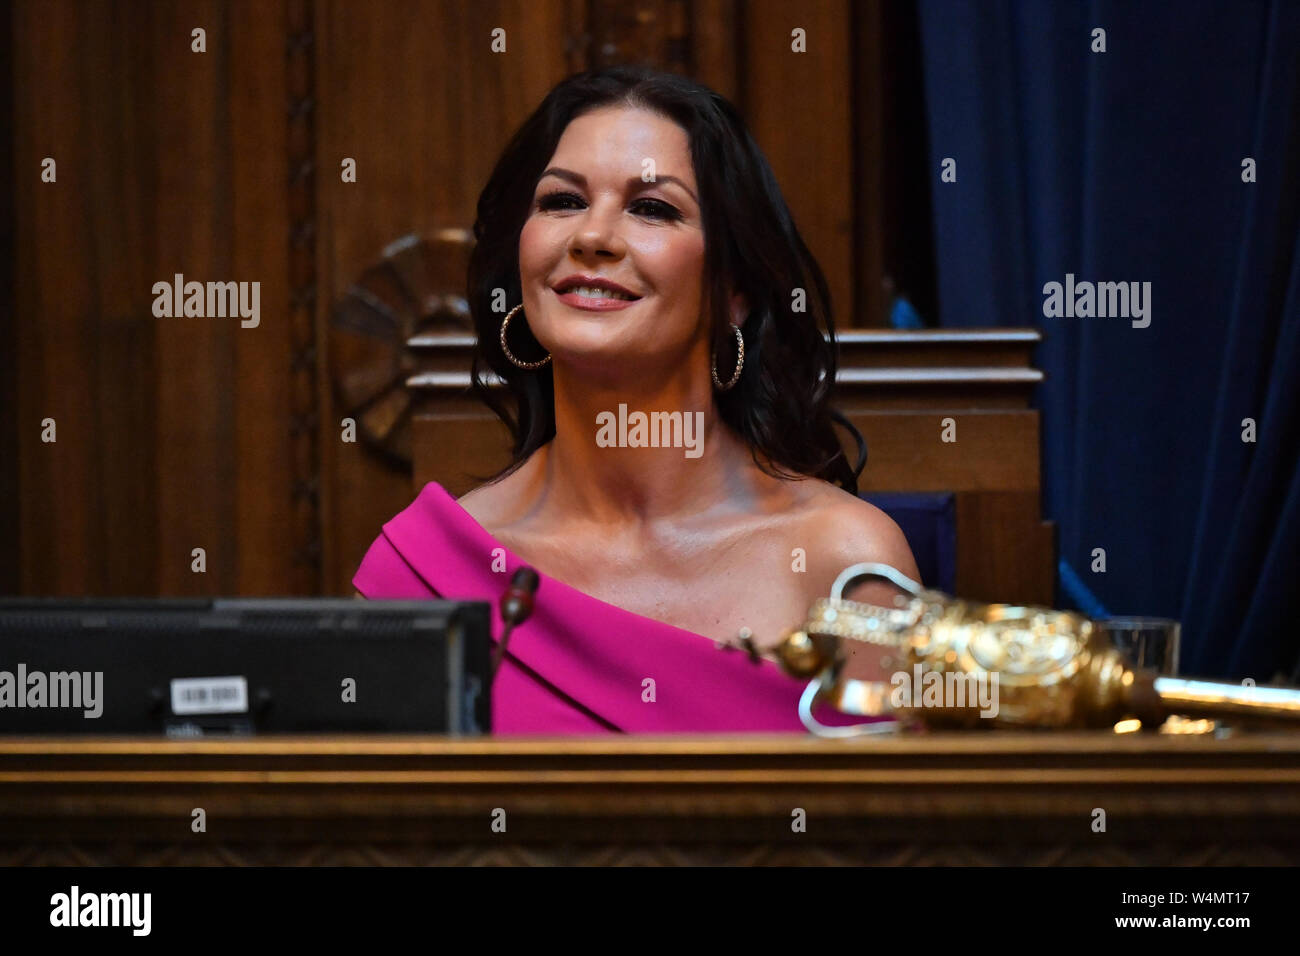 Catherine Zeta-Jones during a ceremony at the Guildhall, Swansea, where she is receiving the Honorary Freedom of the City and County of Swansea. Stock Photo